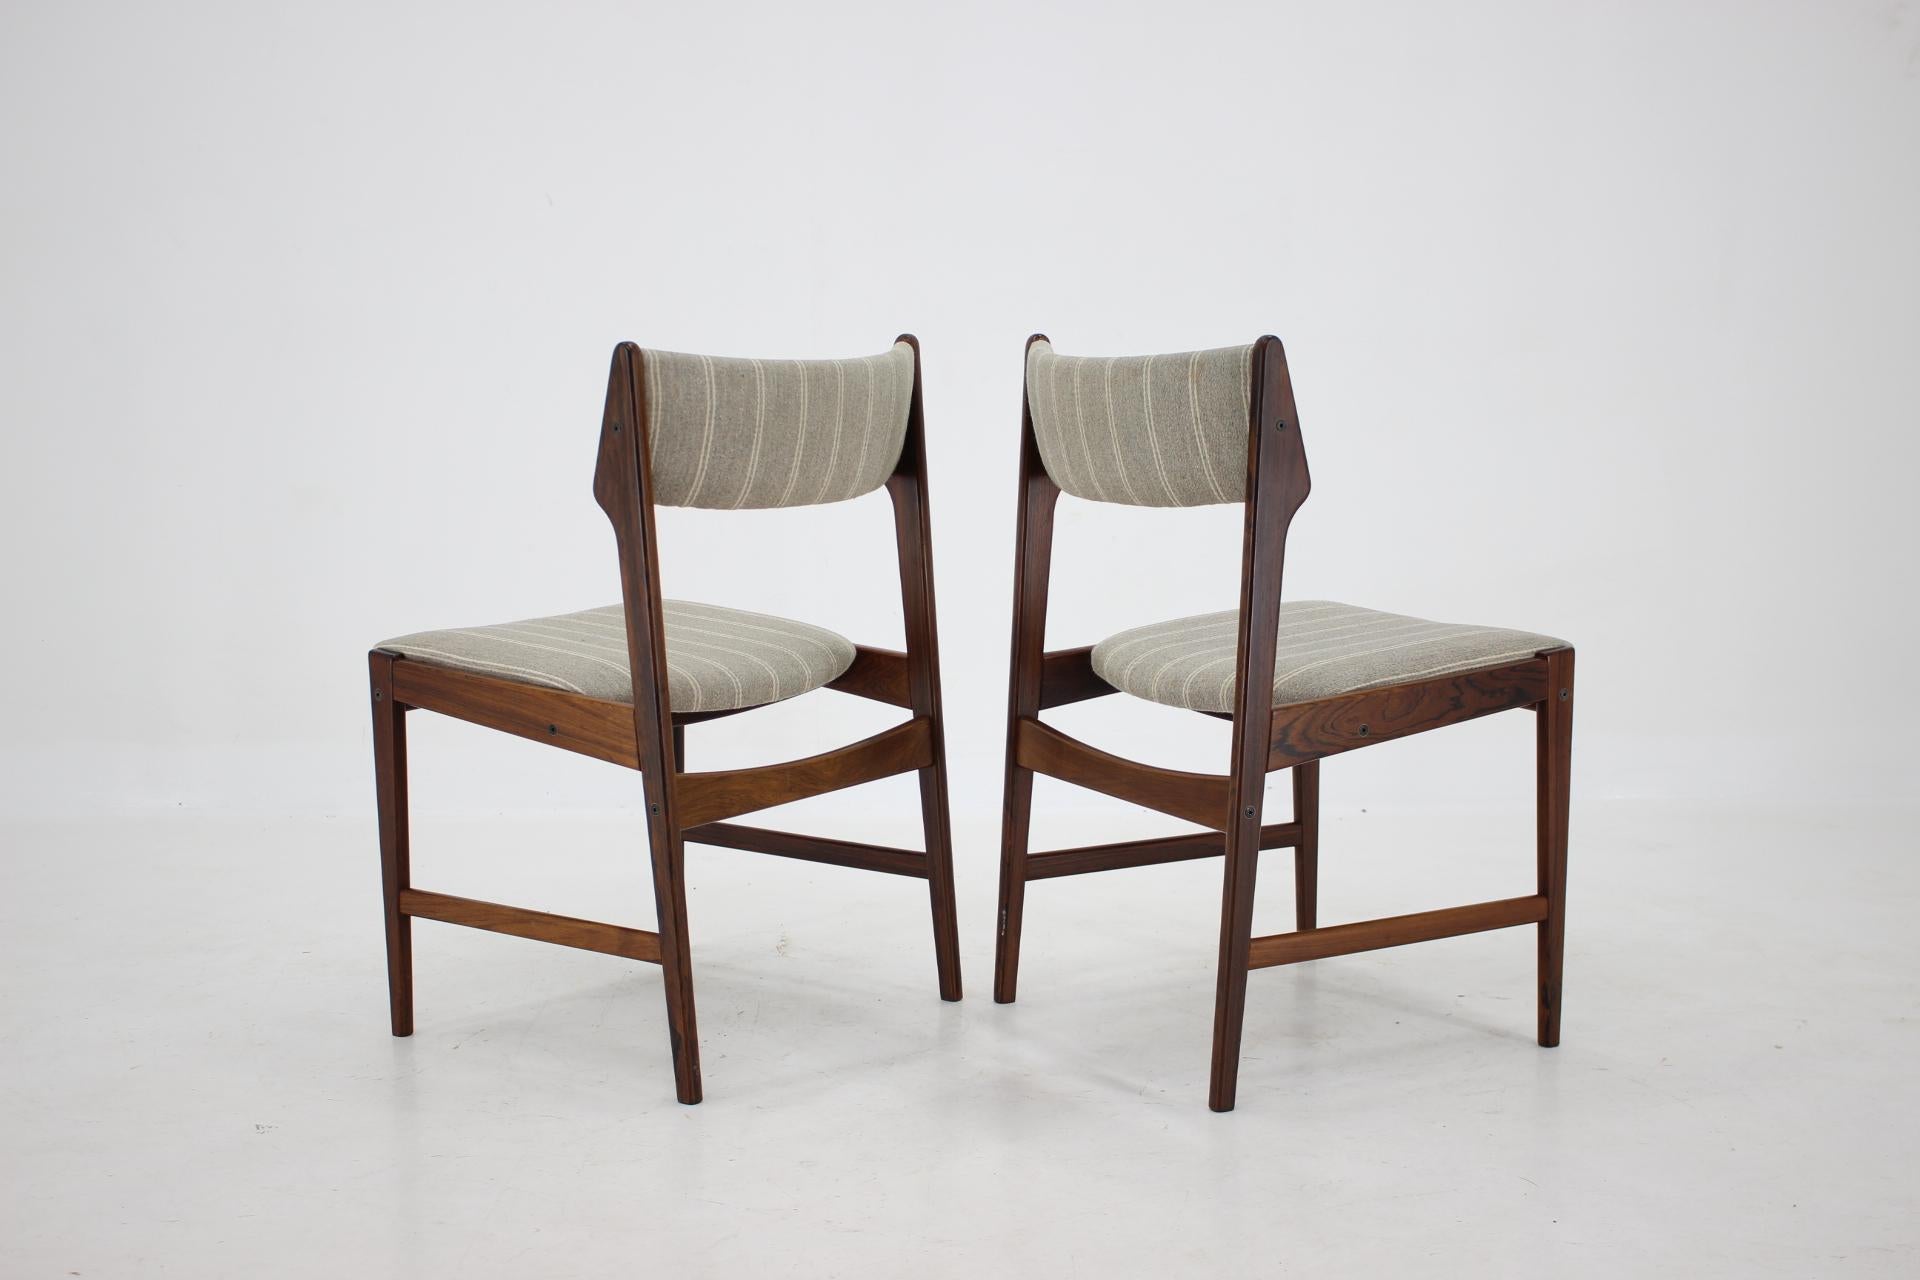 1960s Set of 6 Erich Buch Solid Palisander Dining Chairs, Denmark For Sale 4